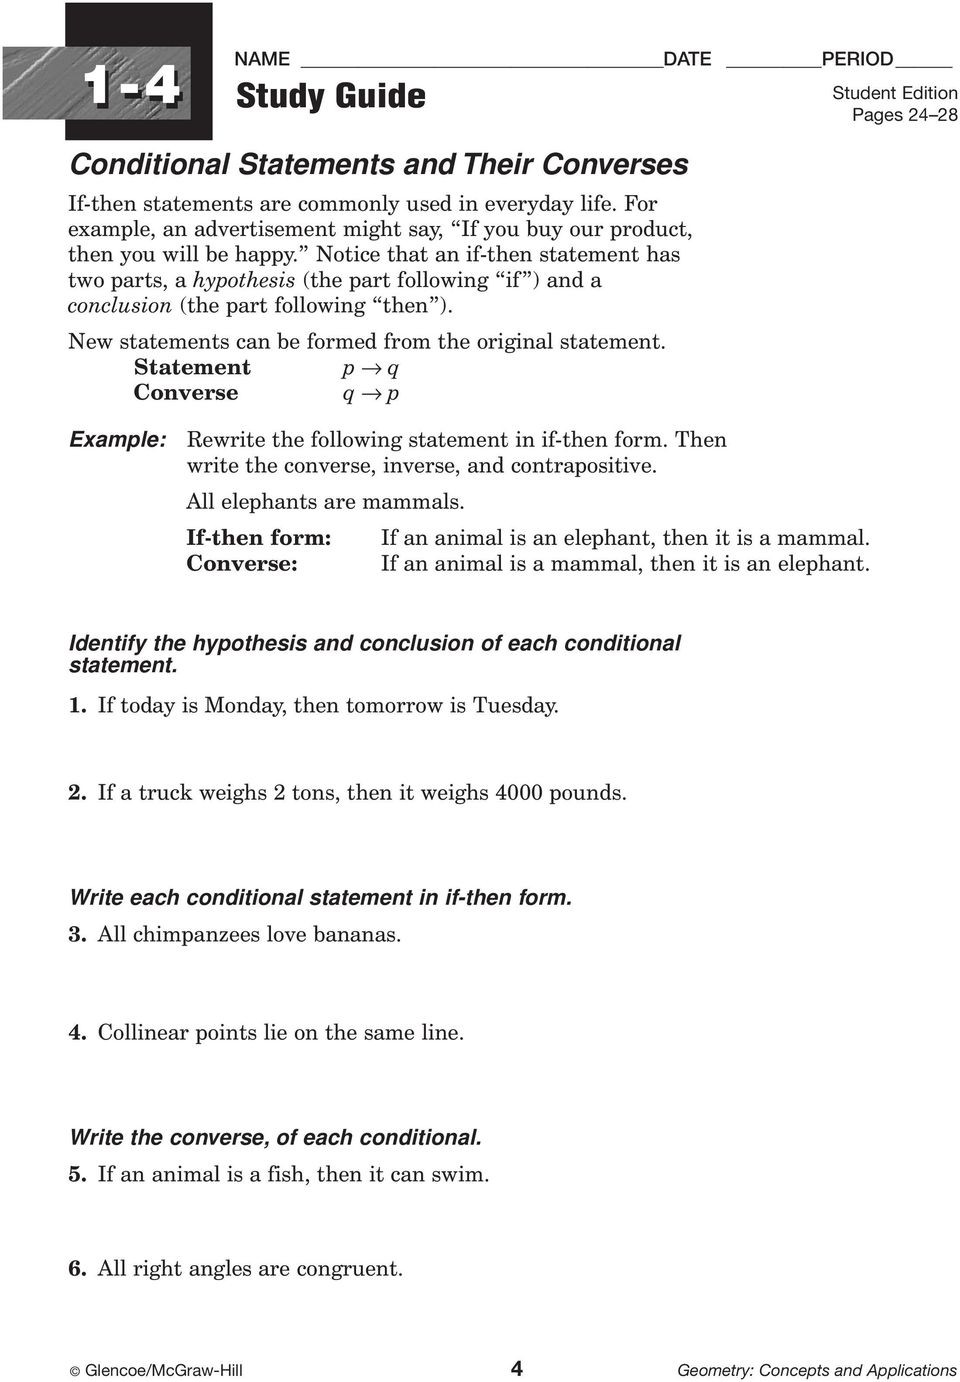 Conditional Statement Worksheet Geometry Study Guide Workbook Contents Include 96 Worksheets One